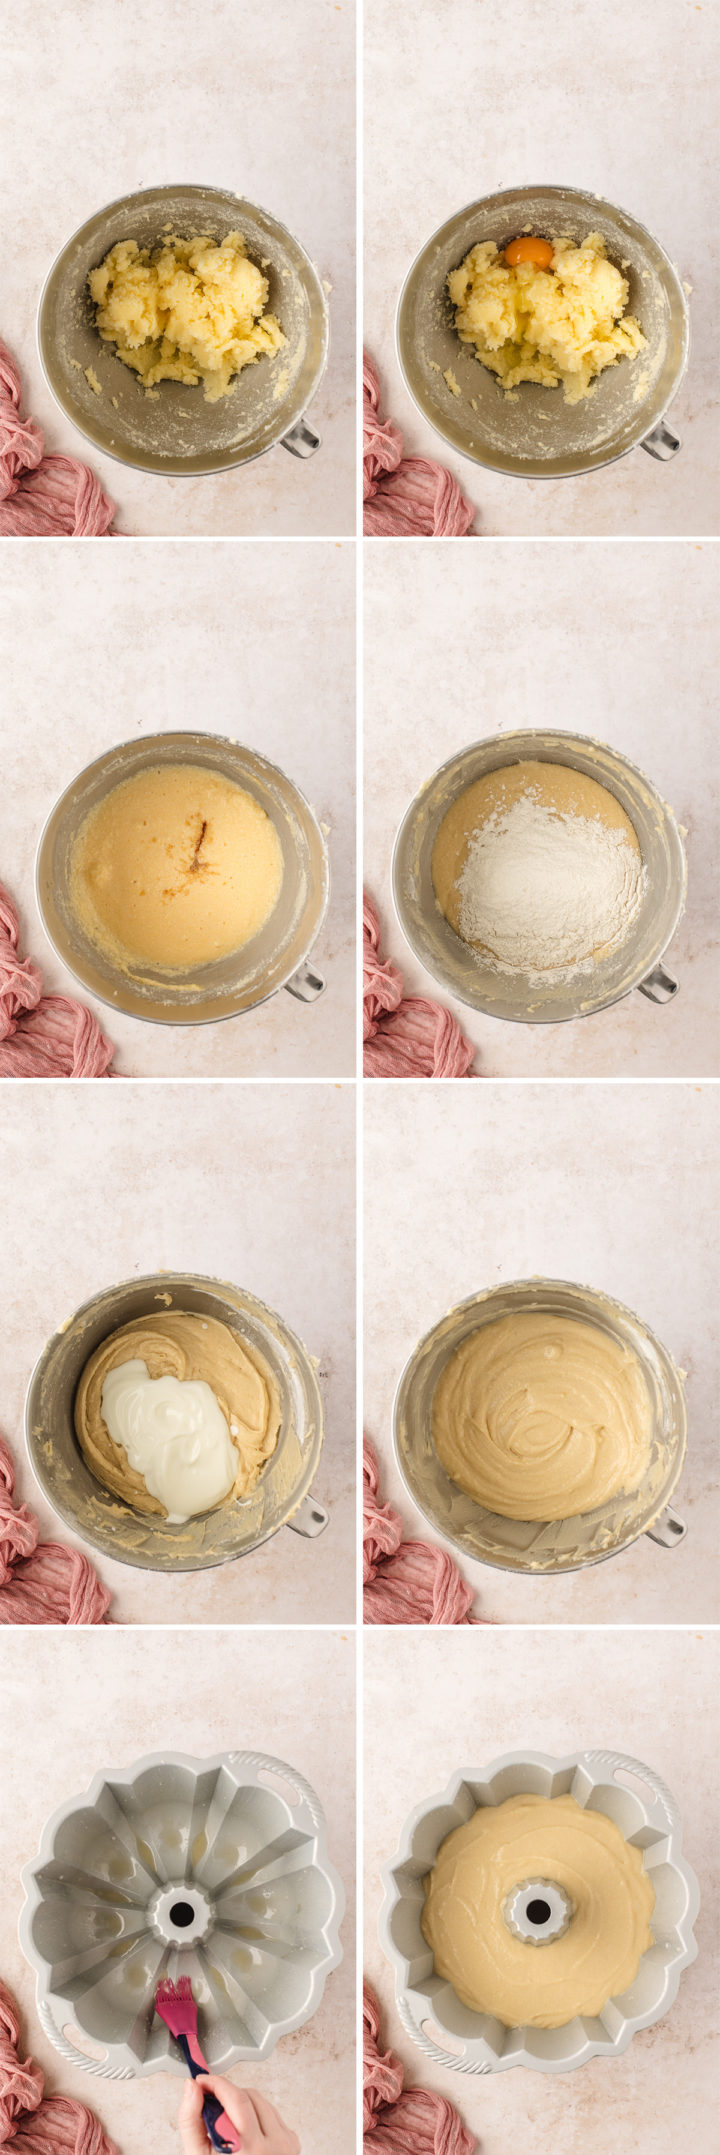 step by step photos showing how to make kentucky butter cake